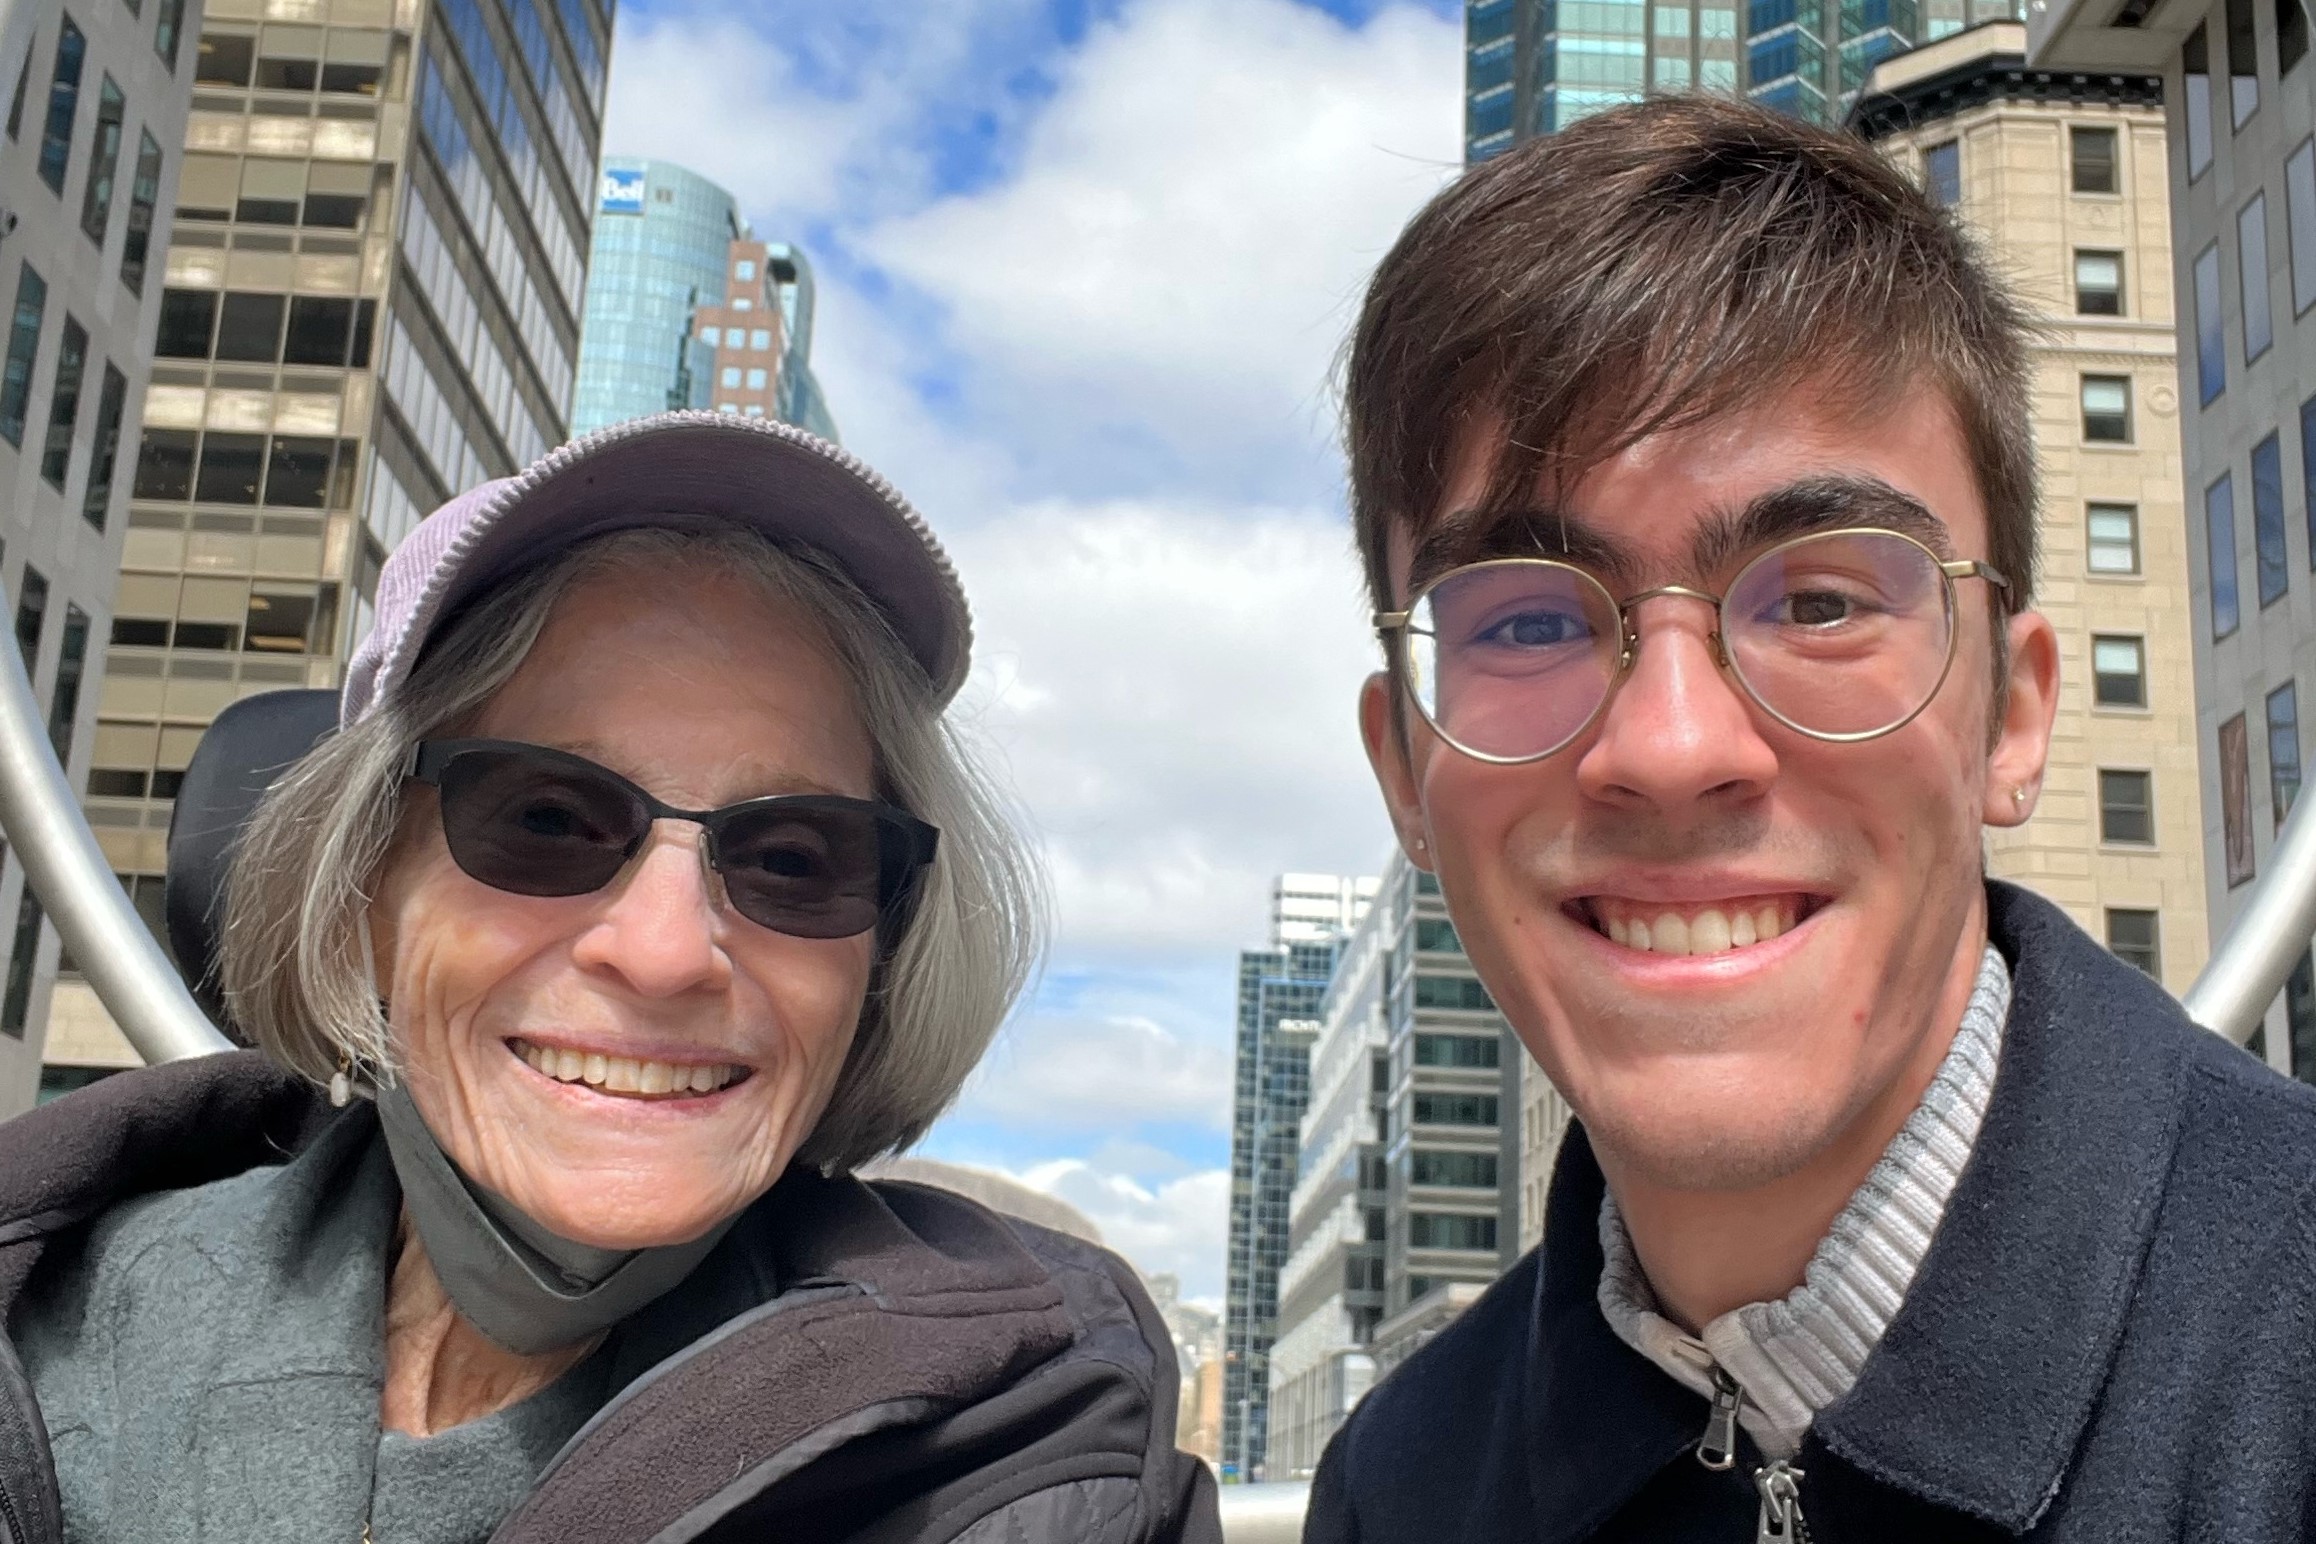 Dorothy and grandson Daniel from the shoulders up, smiling at the camera. The background is city buildings against a cloudy blue sky.